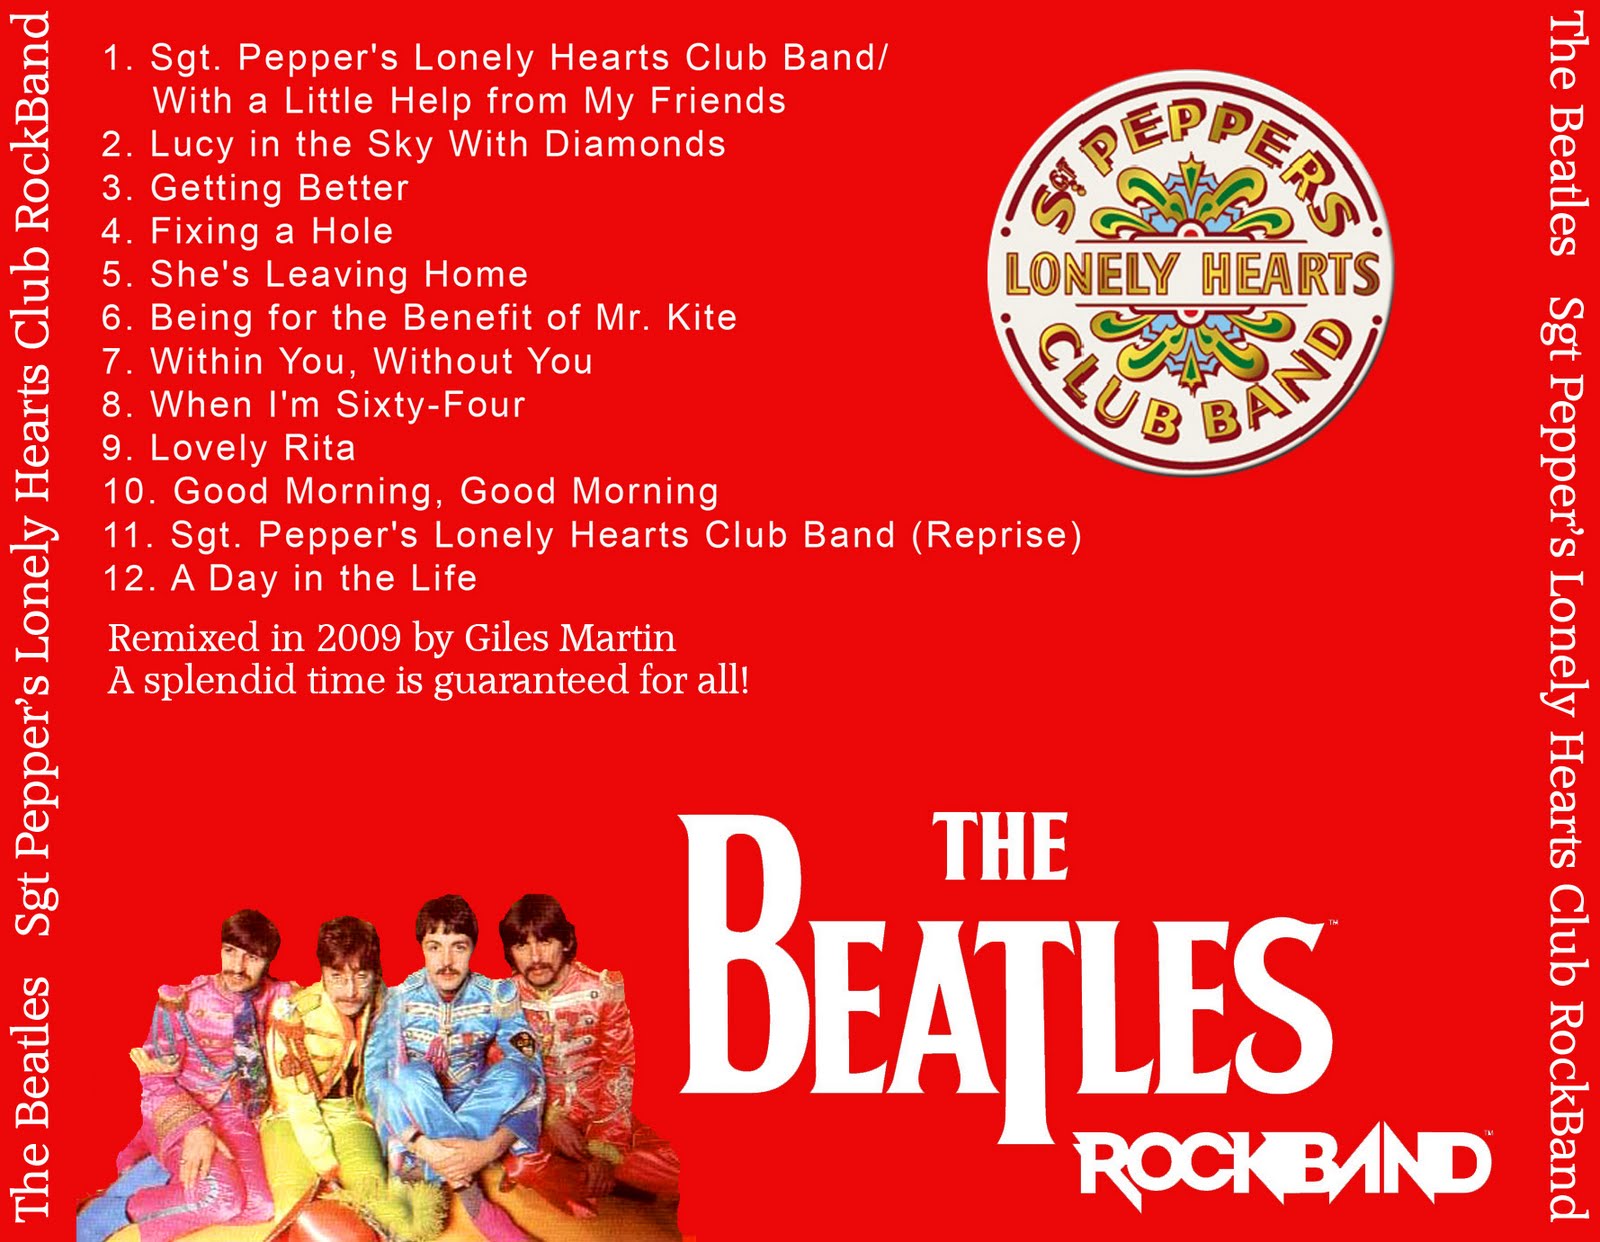 Mp3 pepper. Sgt Pepper's Lonely Hearts Club Band. Sgt Pepper's Lonely Hearts Club Band album Cover. The Beatles Sgt. Pepper's Lonely Hearts Club Band 1967. Sgt. Pepper's Lonely Hearts Club Band CD.